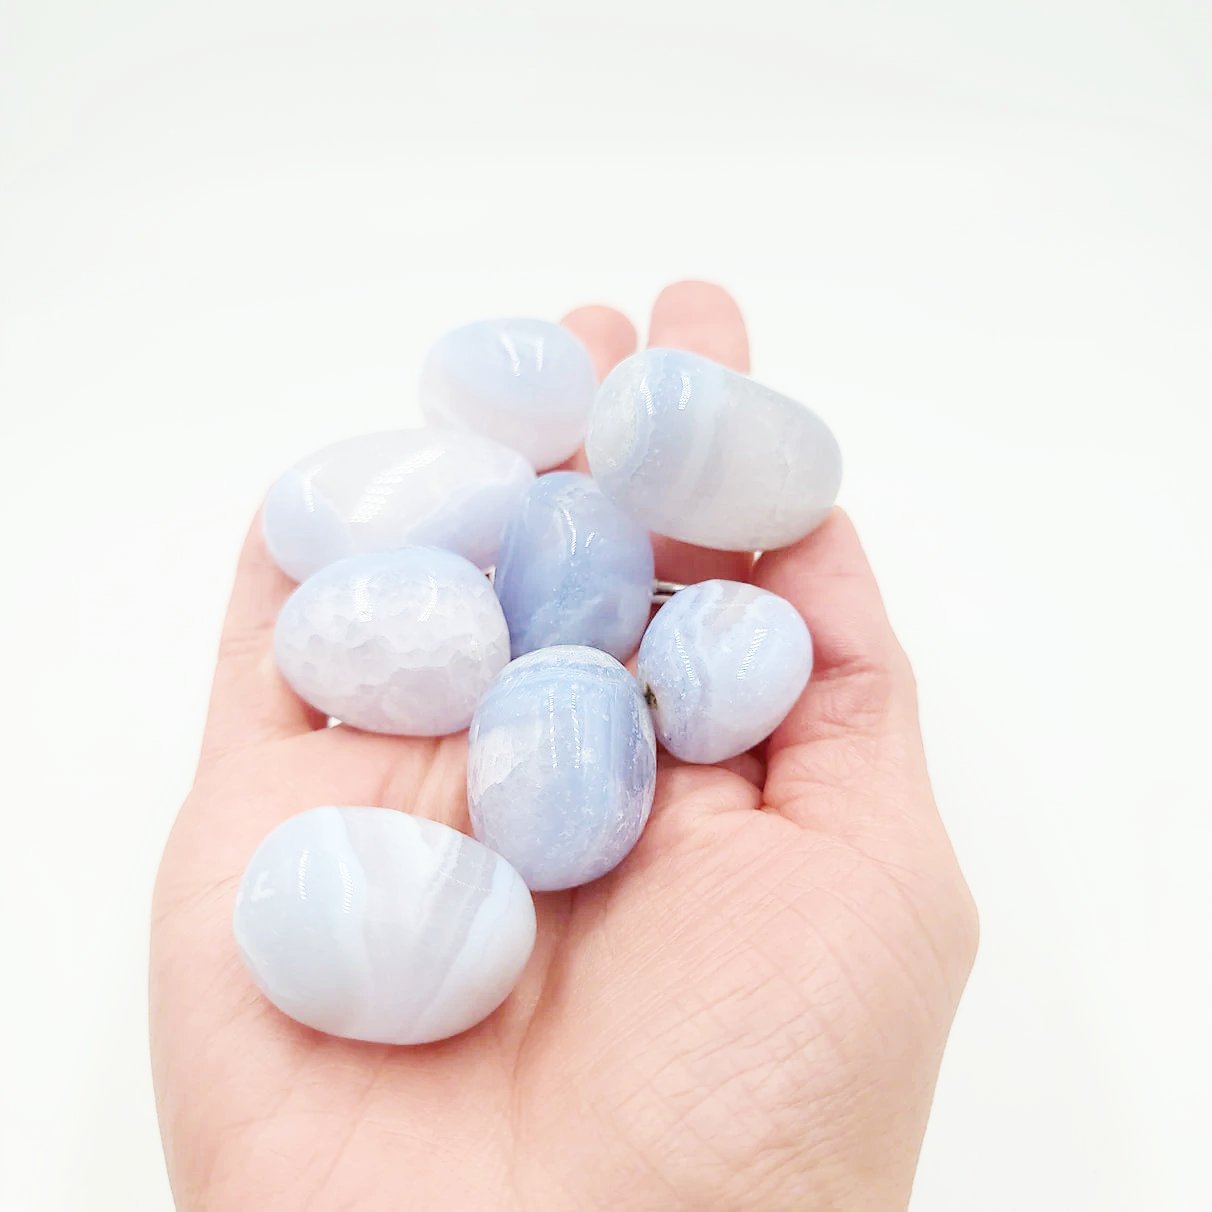 Blue Lace Agate Tumbled Stone - Elevated Metaphysical